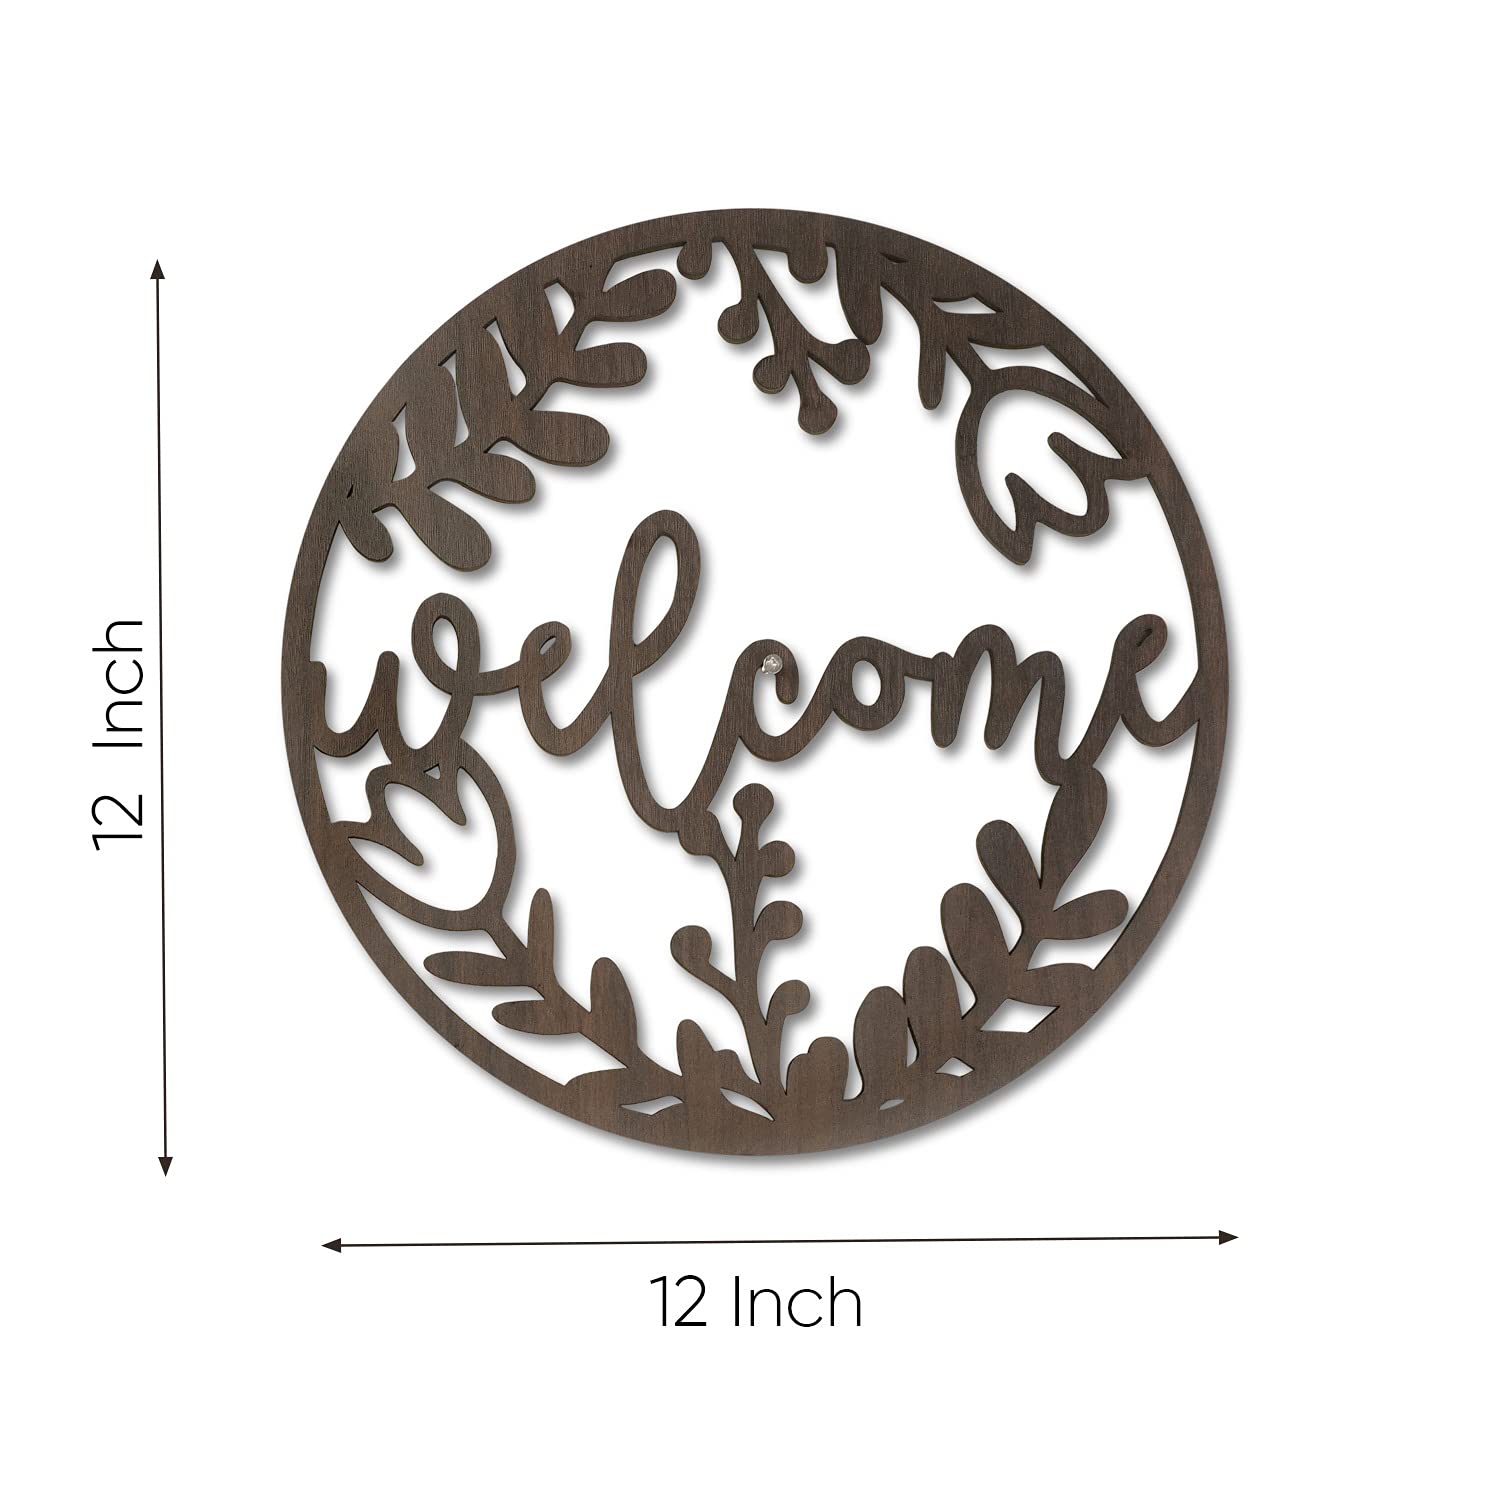 Sketchfab Welcome Name Plates Board Design for Home Villa Entrance Outdoor Hotels Outside House Decor Stylish